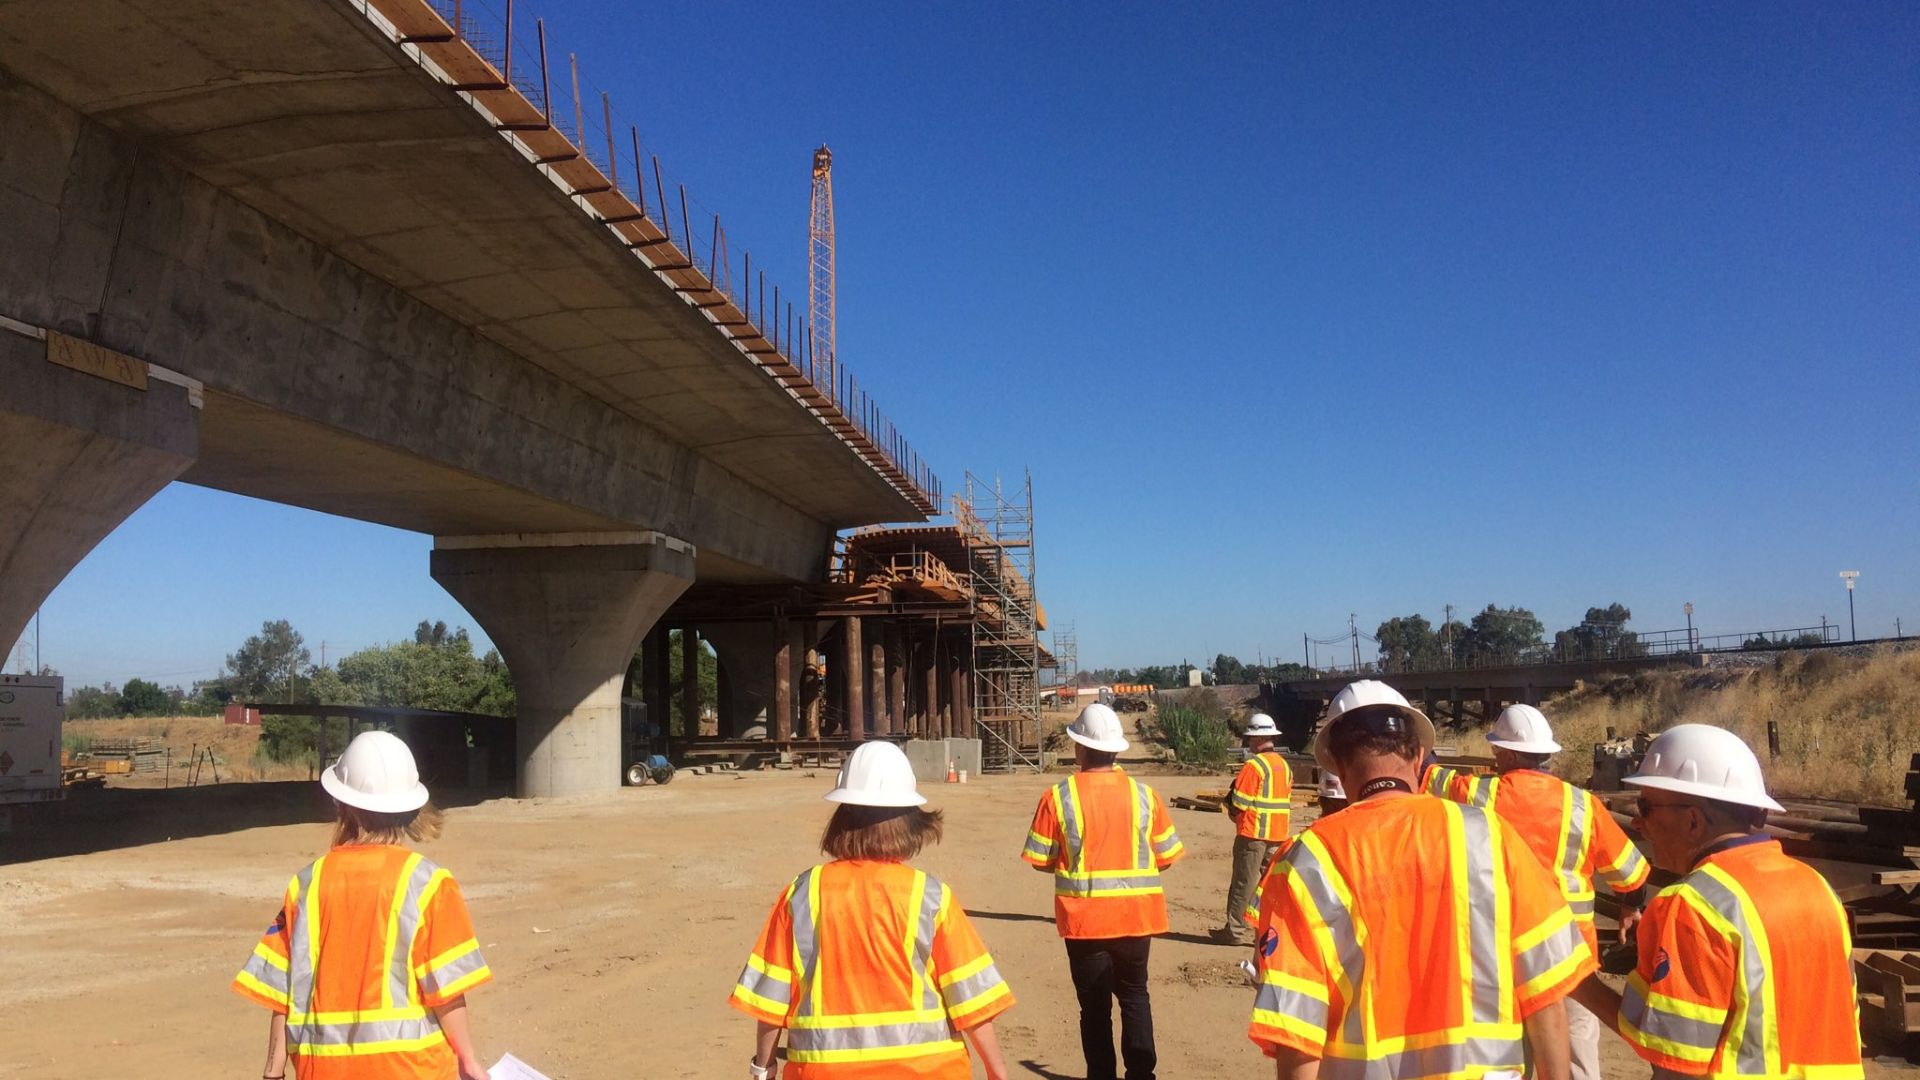 <p>The authority <a href="https://nypost.com/2024/05/04/us-news/california-mocked-over-high-speed-rail-bridge-to-nowhere-that-took-9-years-to-build/">explained</a> that the rail would run parallel with the BNSF Railroad, covering the riverbed area.   </p> <p>This detail was part of the broader strategy to integrate the new high-speed rail with existing transport infrastructures, though the completion of the full route remains uncertain.   </p>